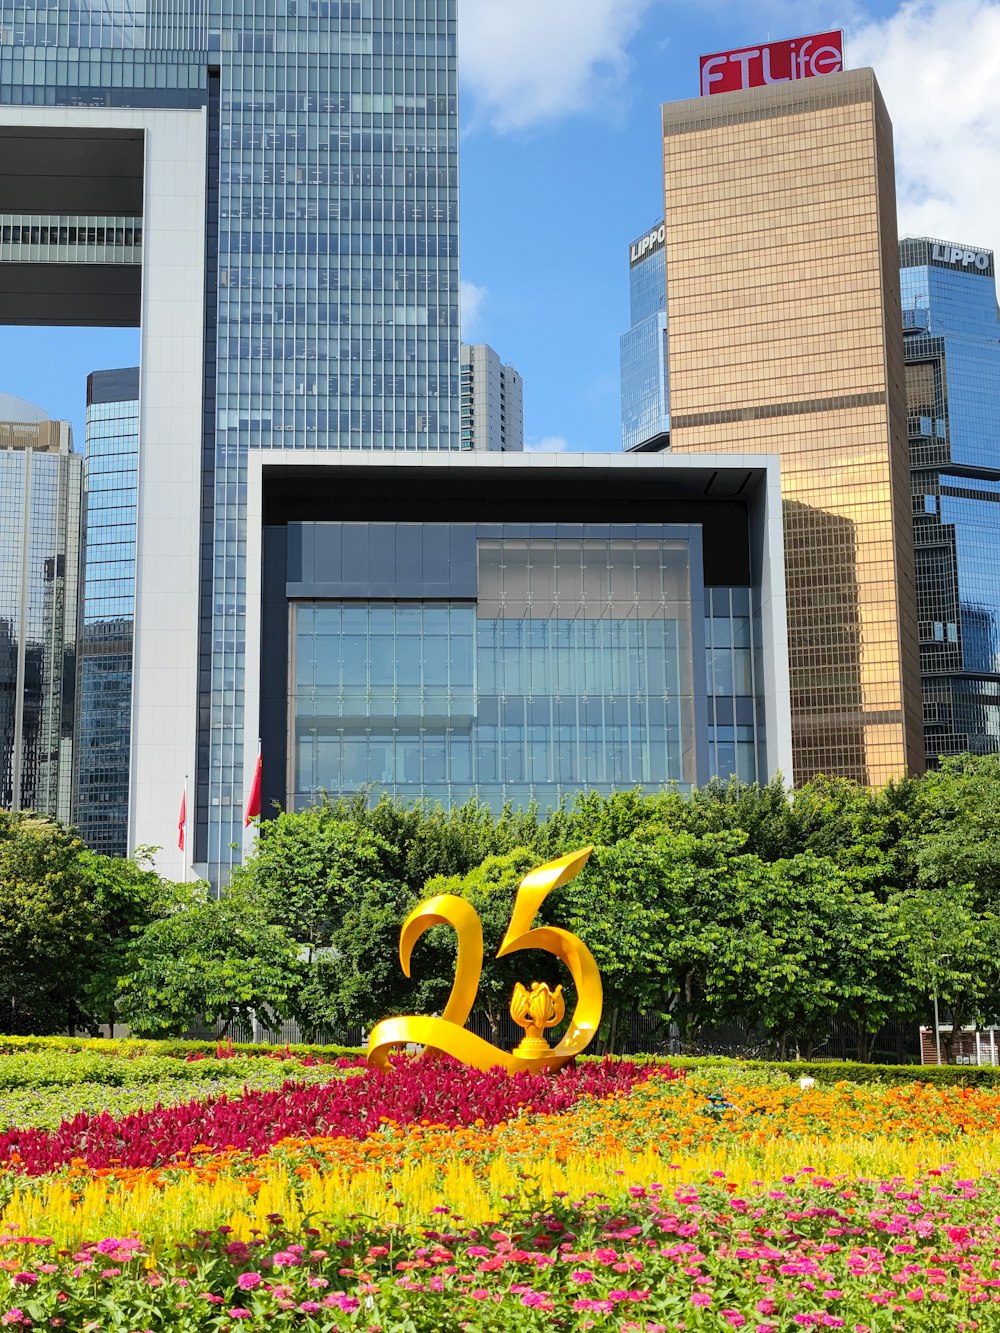 a large flower bed in front of a city